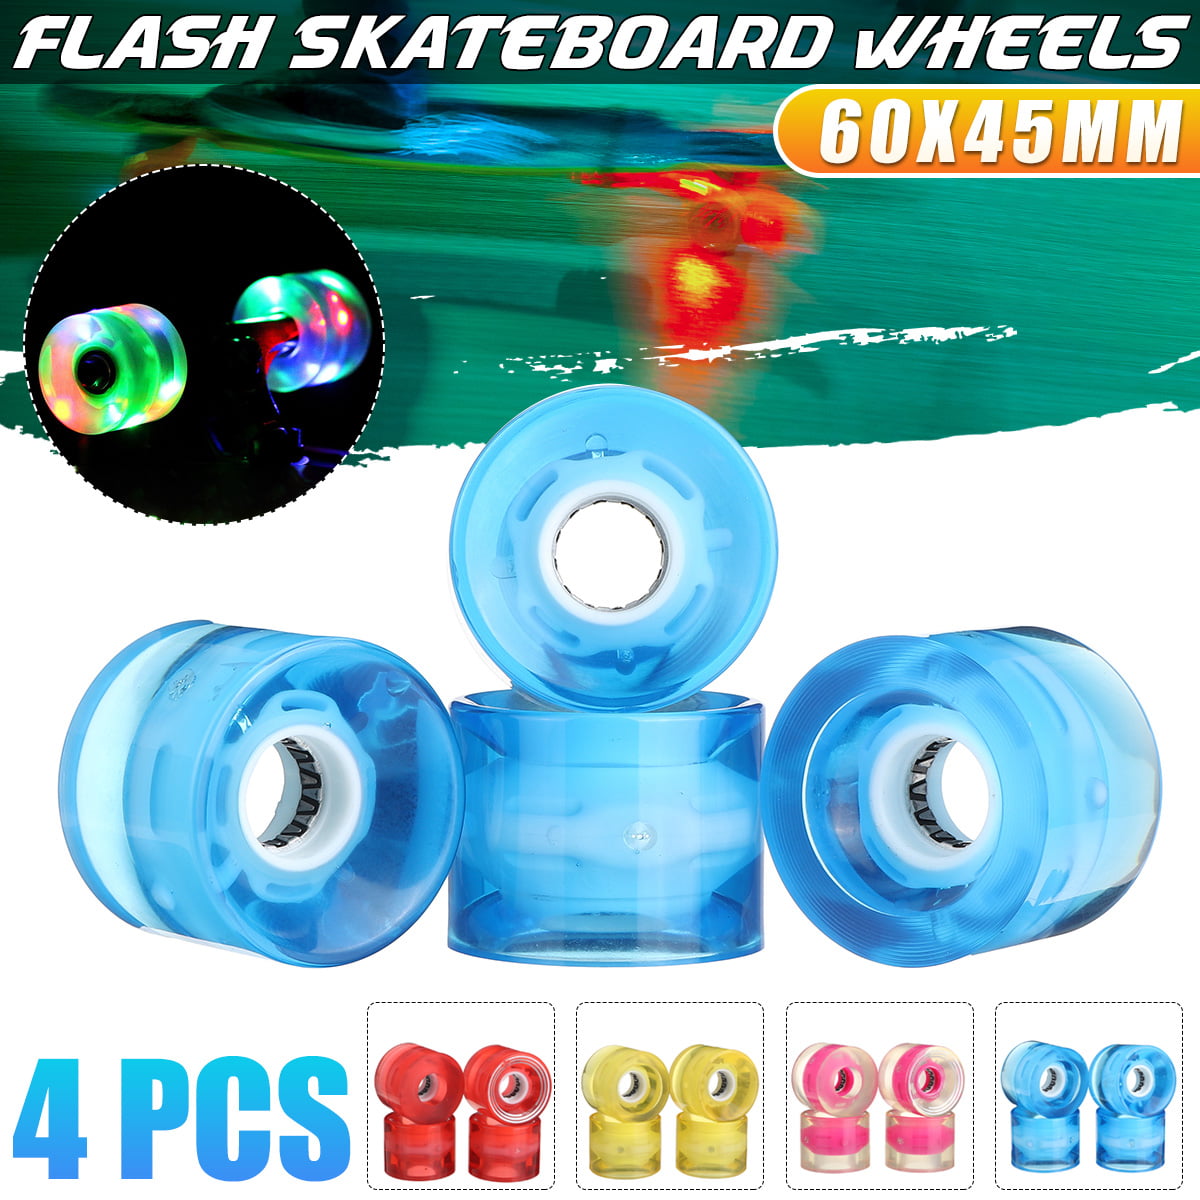 4 Pcs/Lot Luminous LED Skating Flashing Wheels For Kids With Magnetic Core Cell 